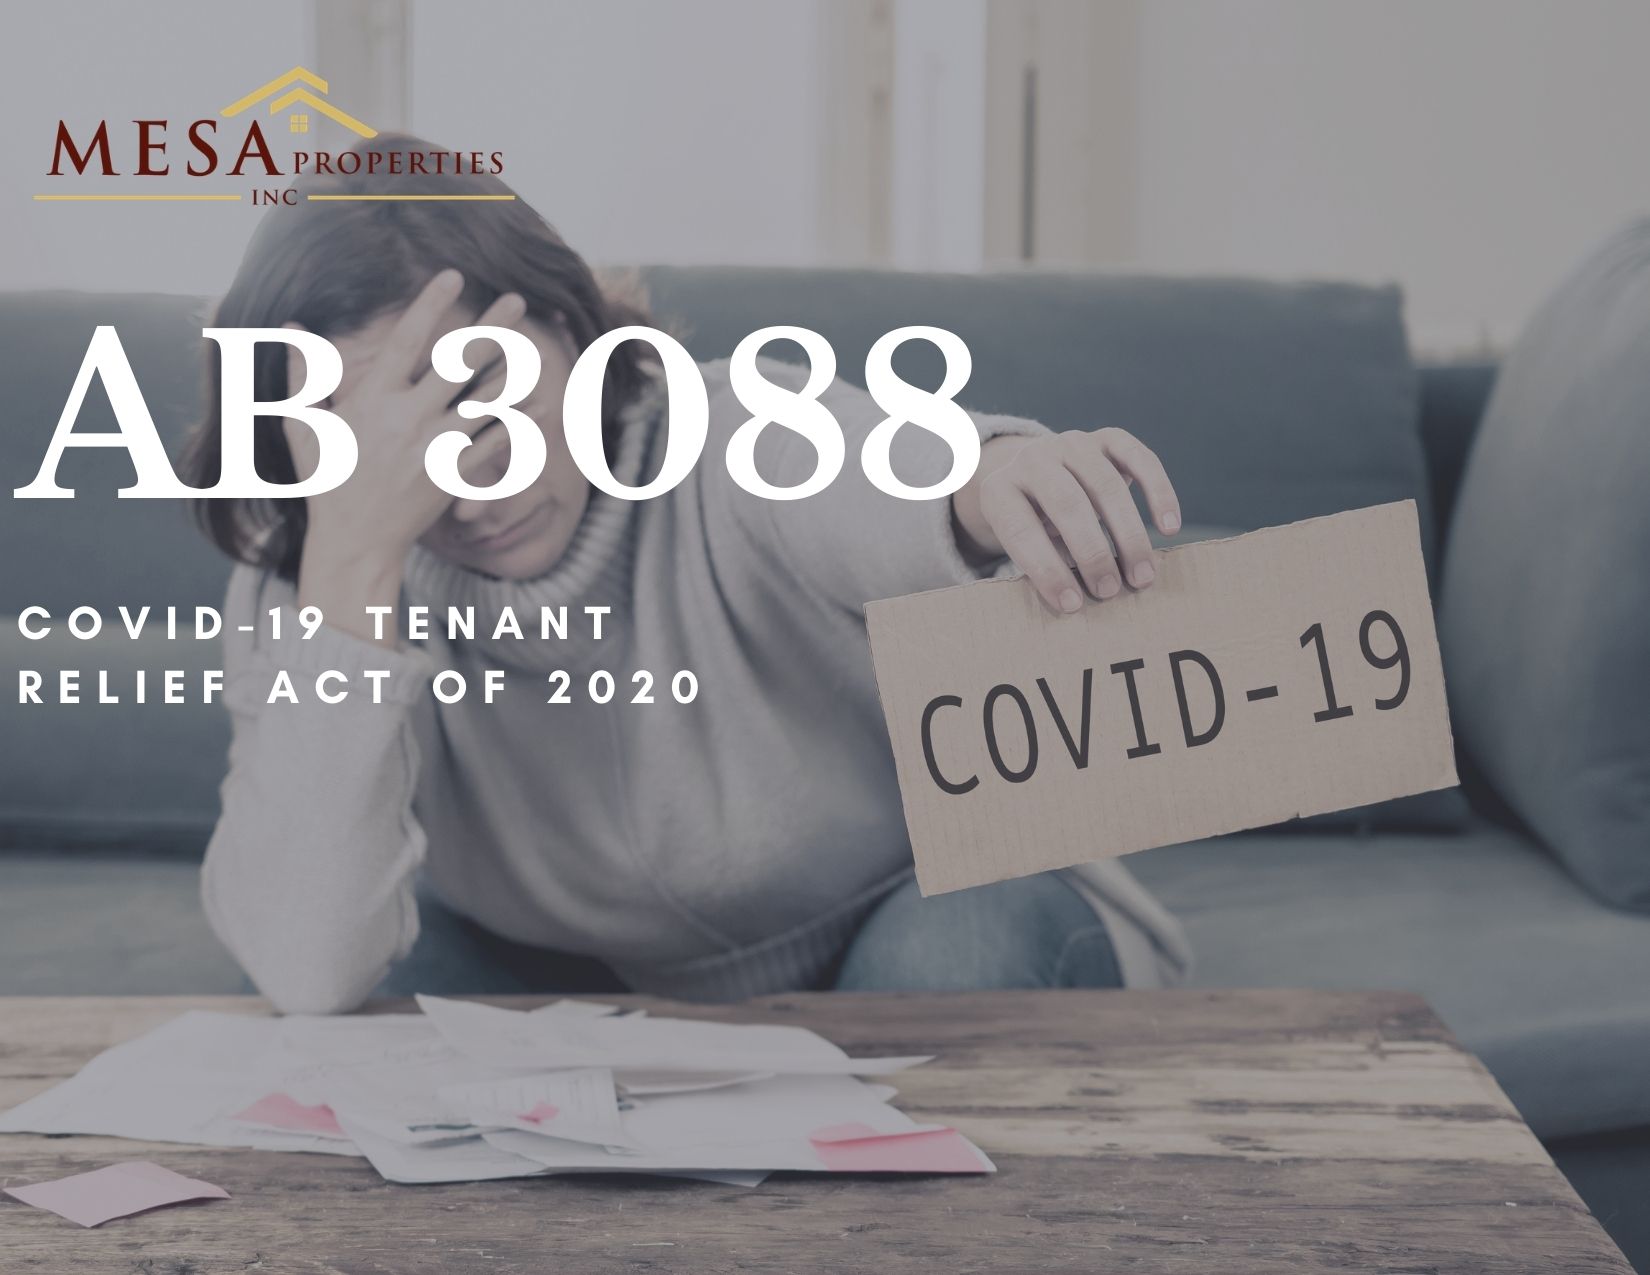 AB3088 - No Evictions In The Inland Empire And High Desert Until 2021?